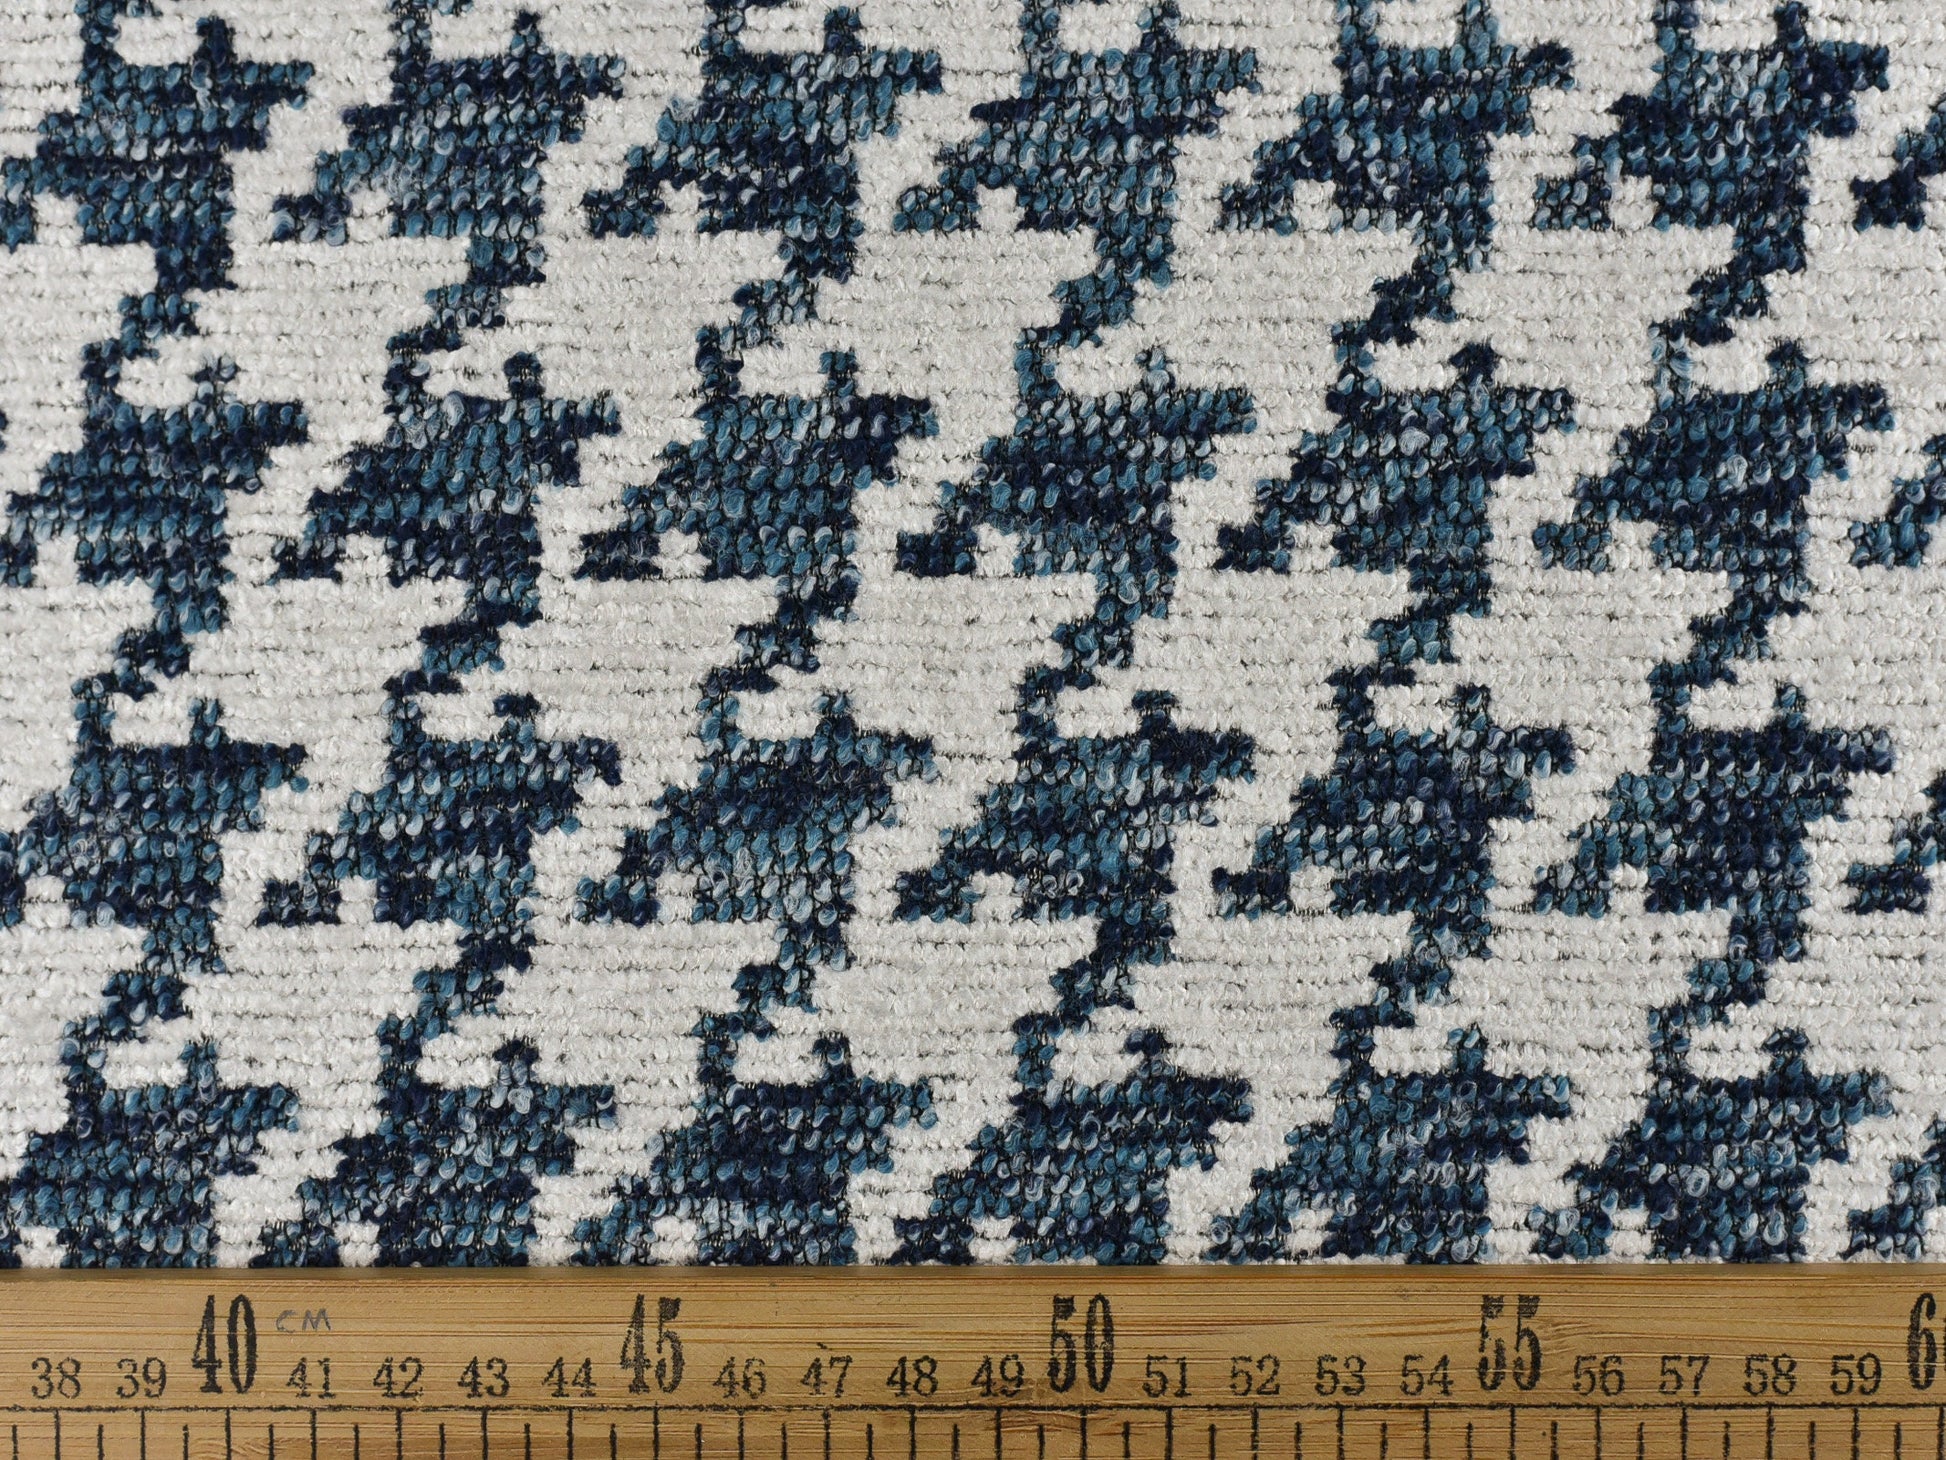 Premium Quality Vintage Woven Large Houndstooth Check Texture Upholstery Fabric By The Yard Dutch Blue